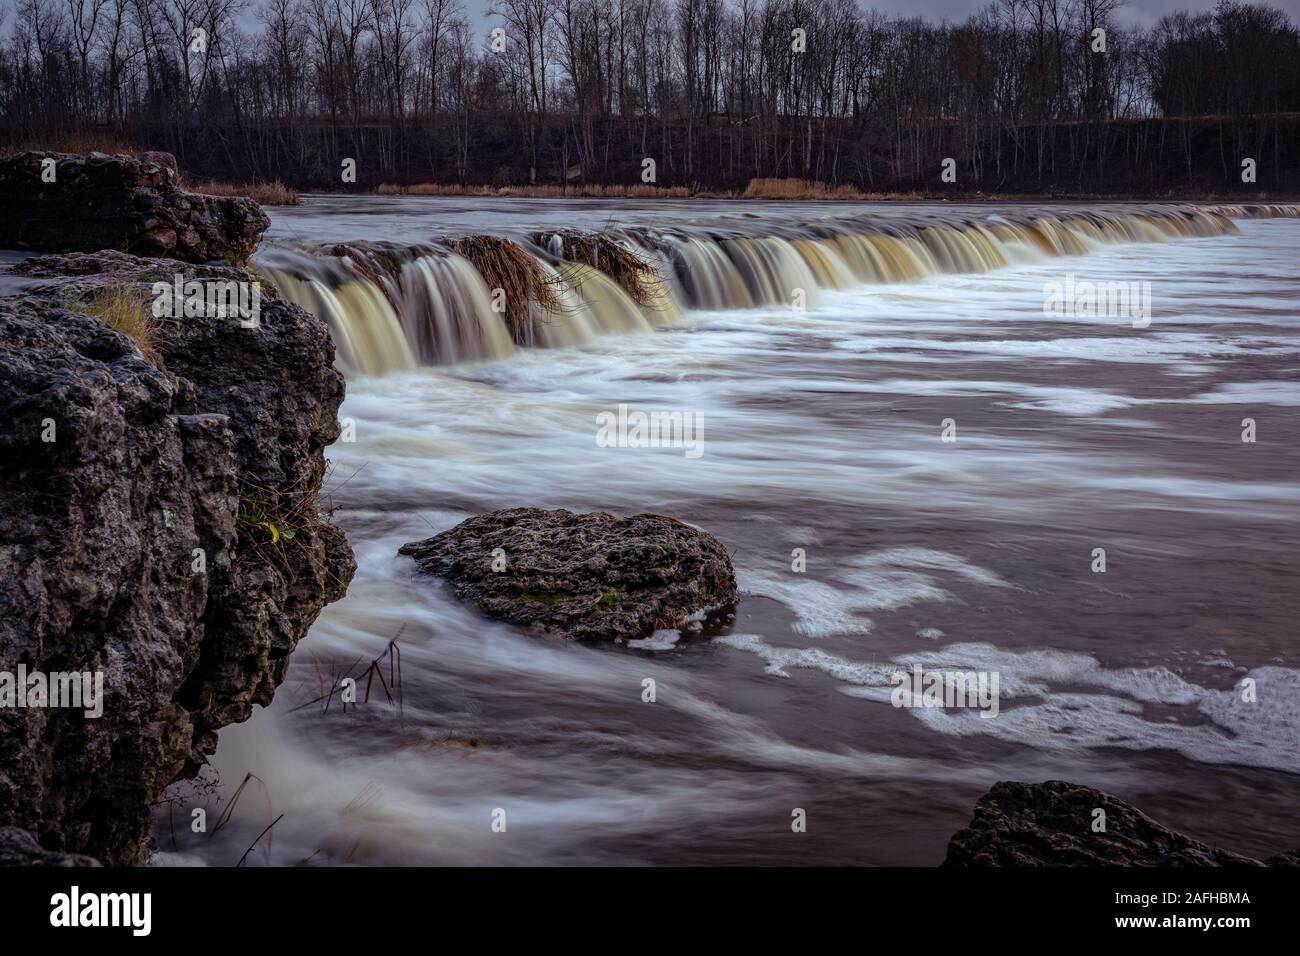 The Venta Rapid in Kuldiga, Latvia. A 240-meter wide natural rapid is the widest in Europe. Stock Photo